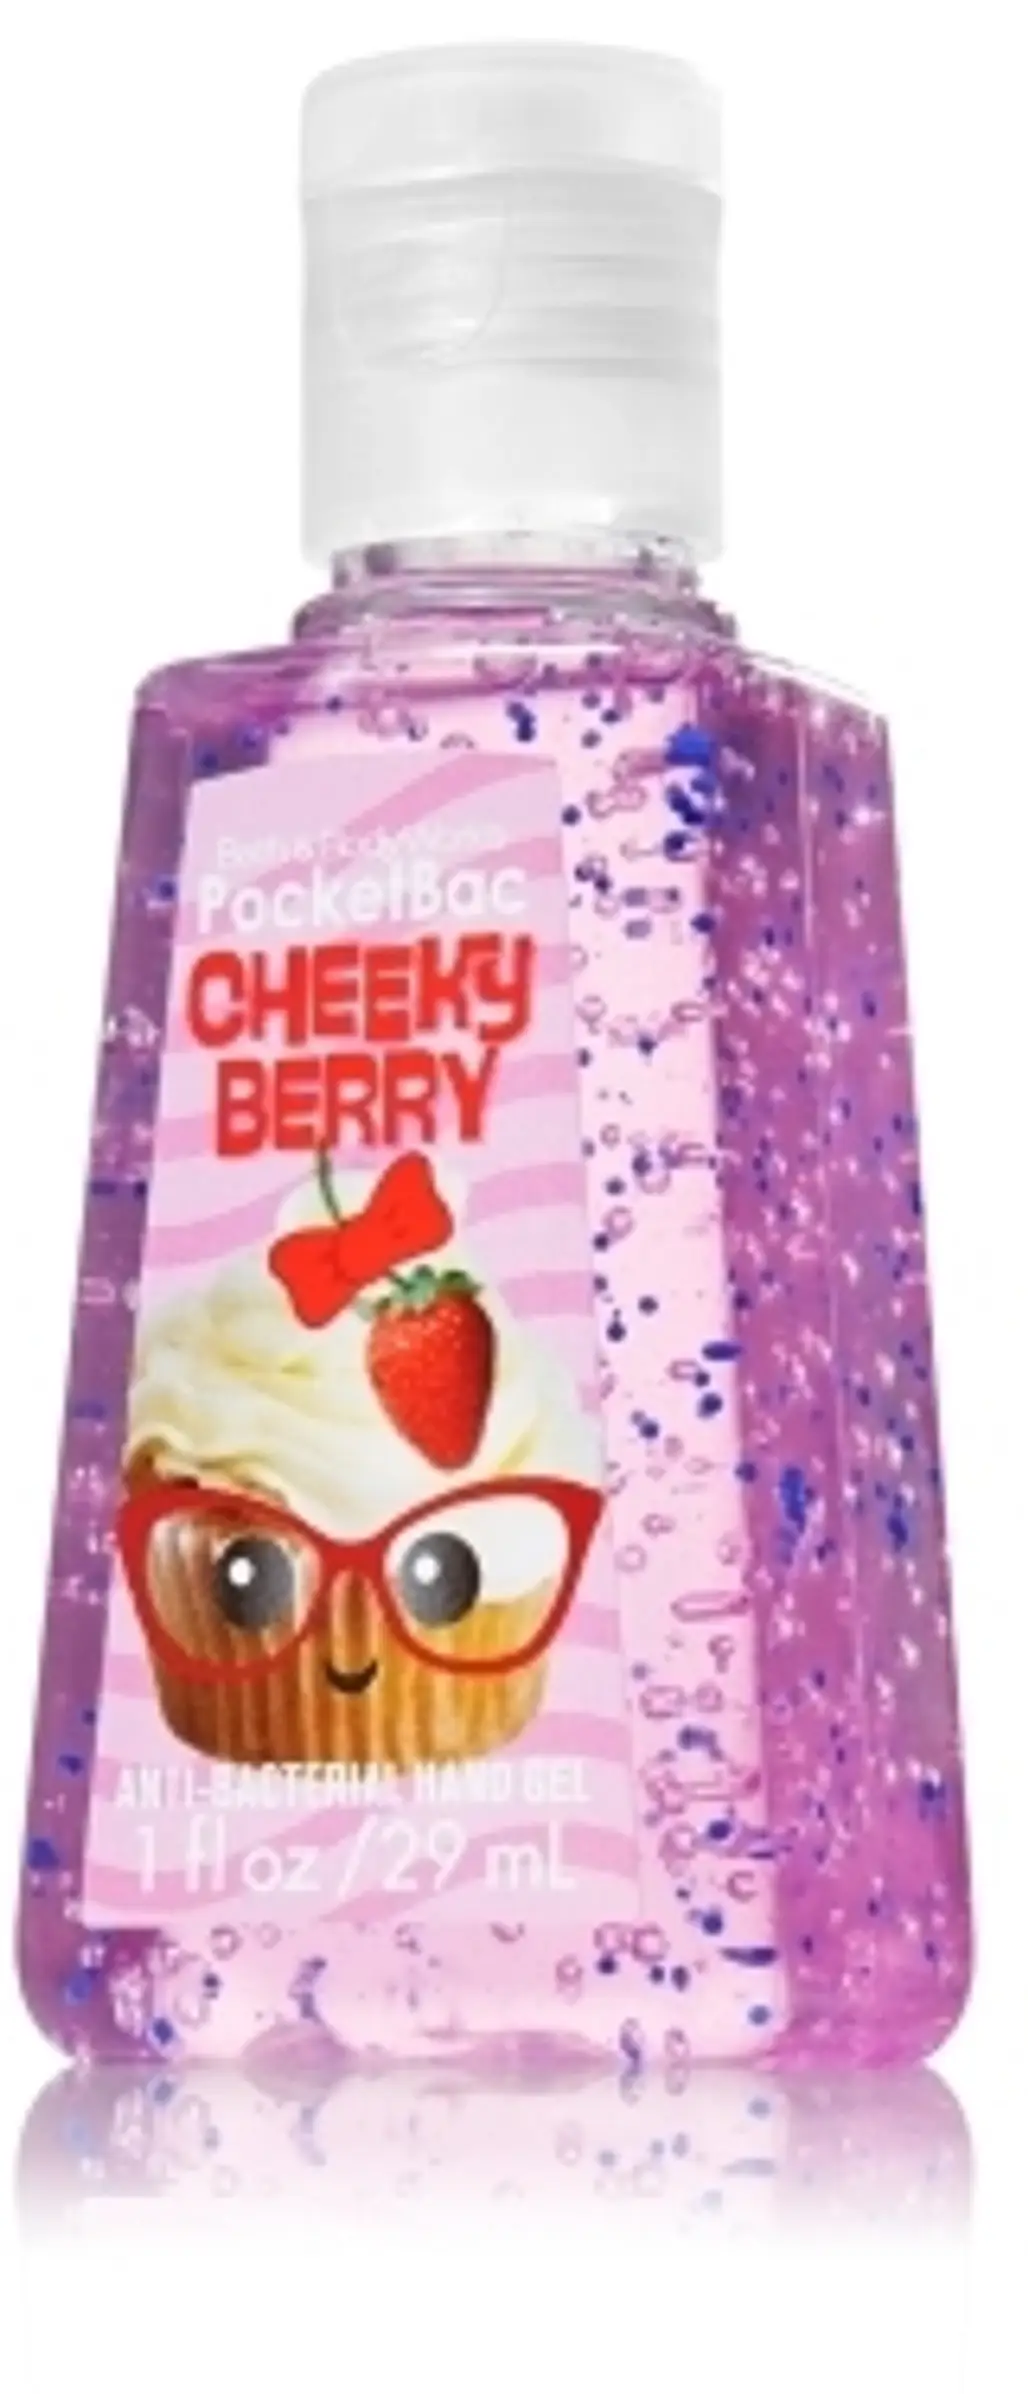 Anti-Bacterial PocketBac Sanitizing Hand Gel Cheeky Berry from Bath and Body Works